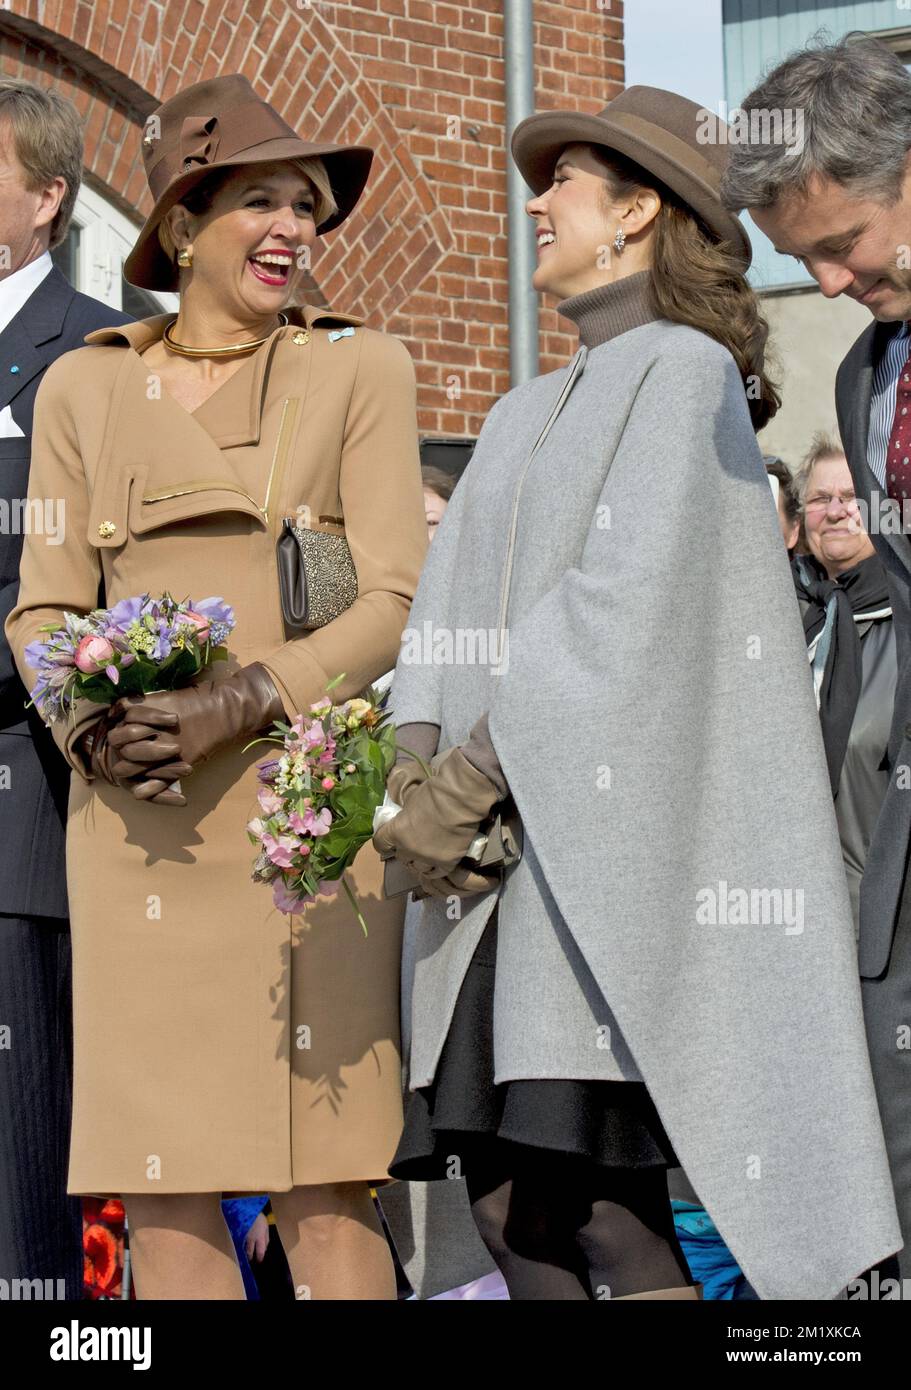 18-3-2015 COPENHAGEN - King Willem-Alexander and Queen Maxima of The Netherlands and Crown Prince Frederik and Crown Princess Mary of Denmark visit Samso Island where they are official welcomed by mayor Marcel Meijer Denmark, 18 March 2015. The Dutch King and Queen are in Denmark for an two day state visit. COPYRIGHT ROBIN UTRECHT Stock Photo